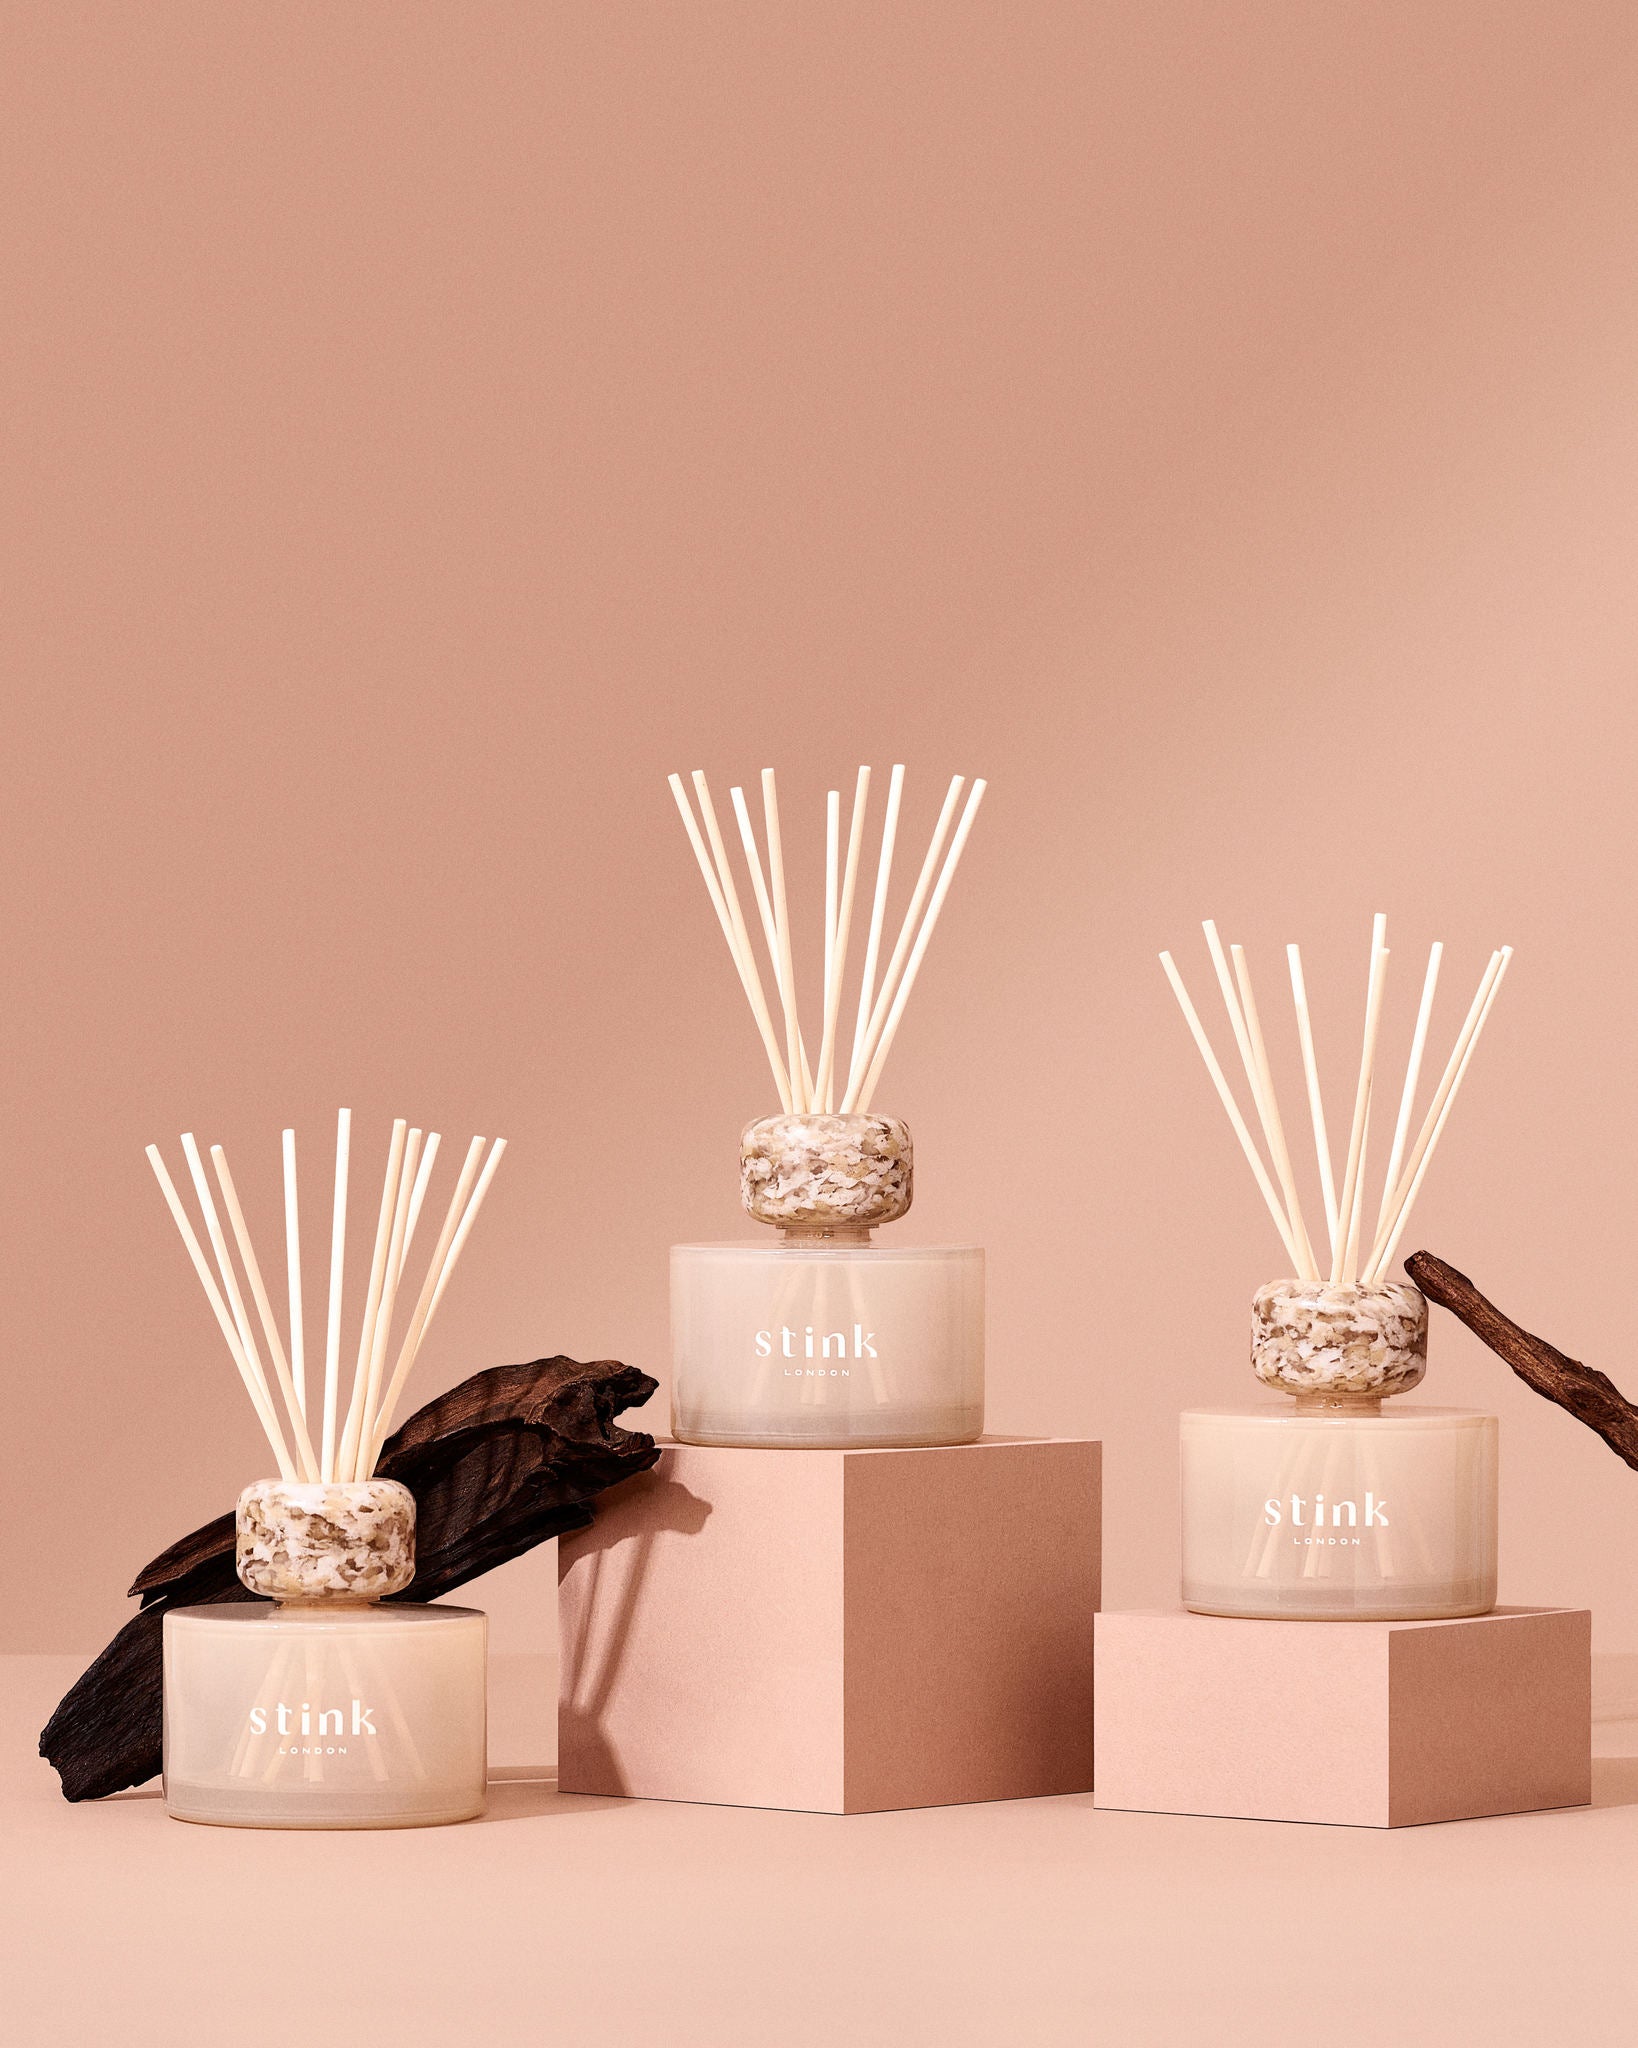 stink london reed diffusers